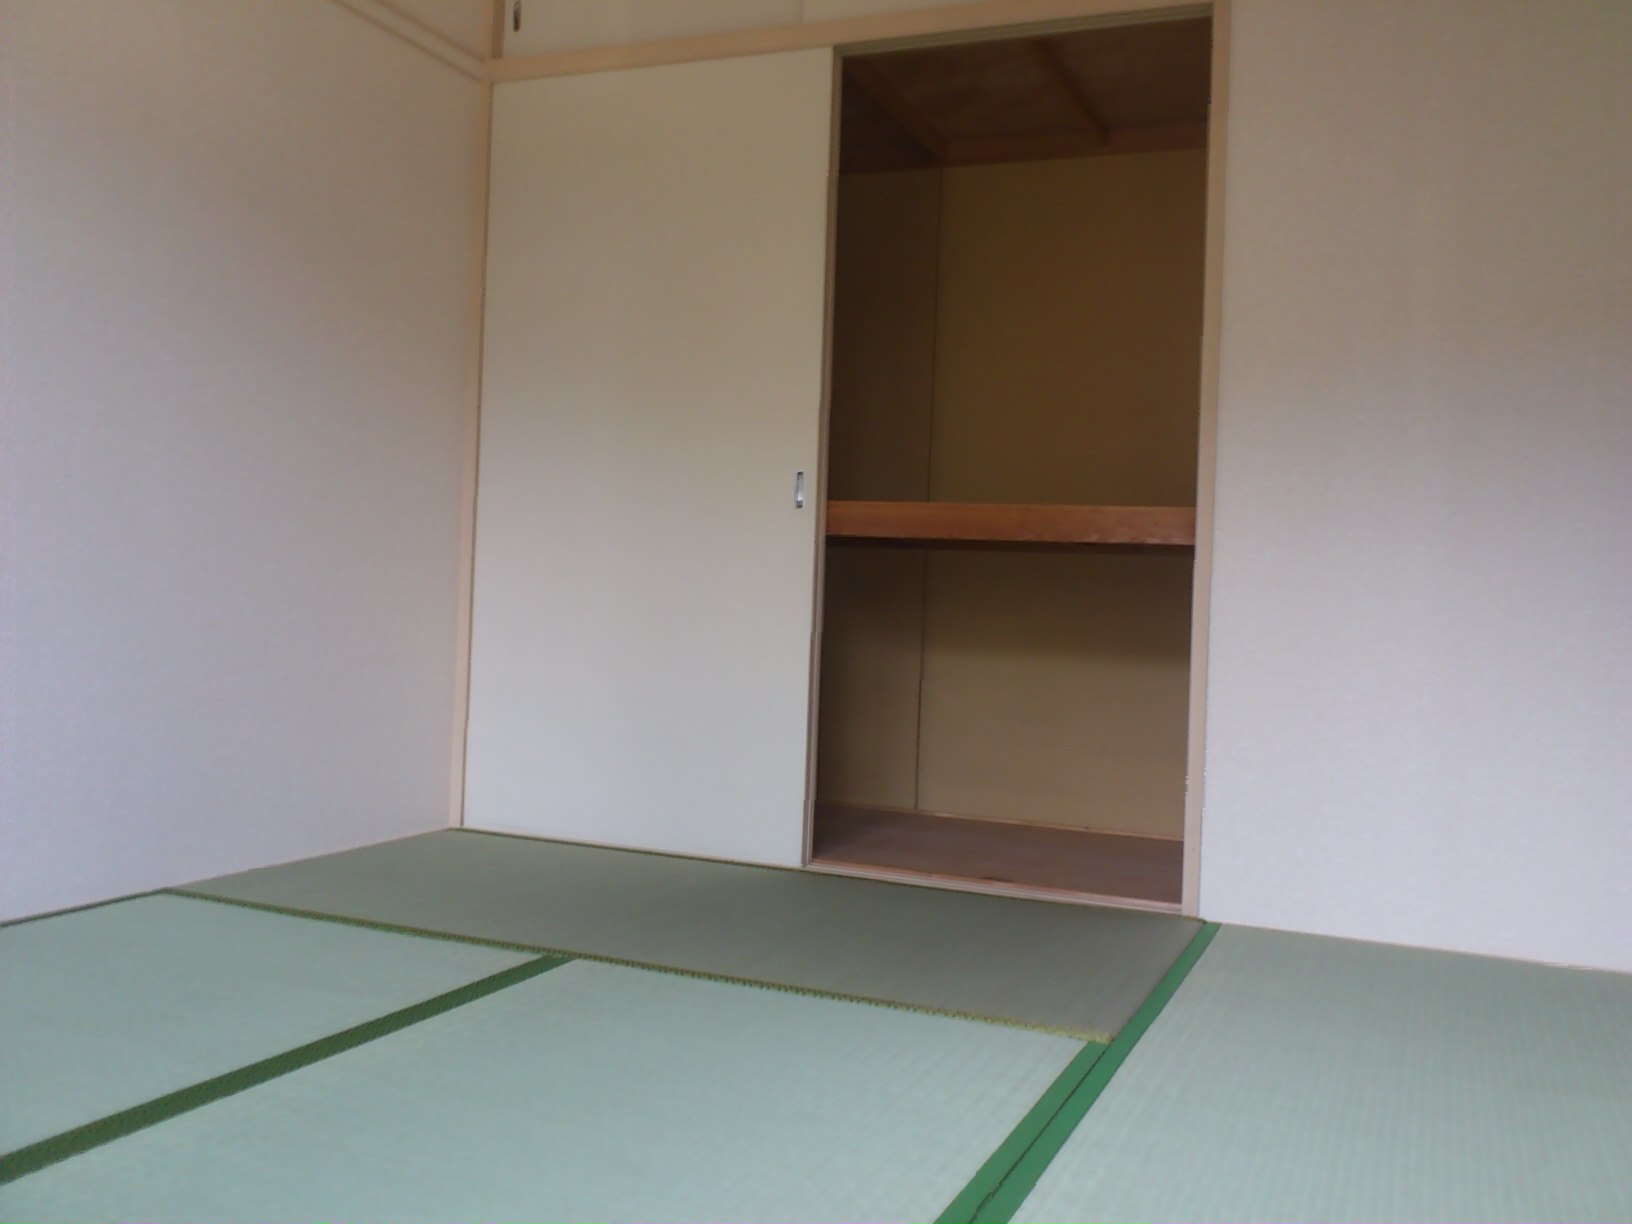 Living and room. Storage space of the Japanese-style room is also rich.